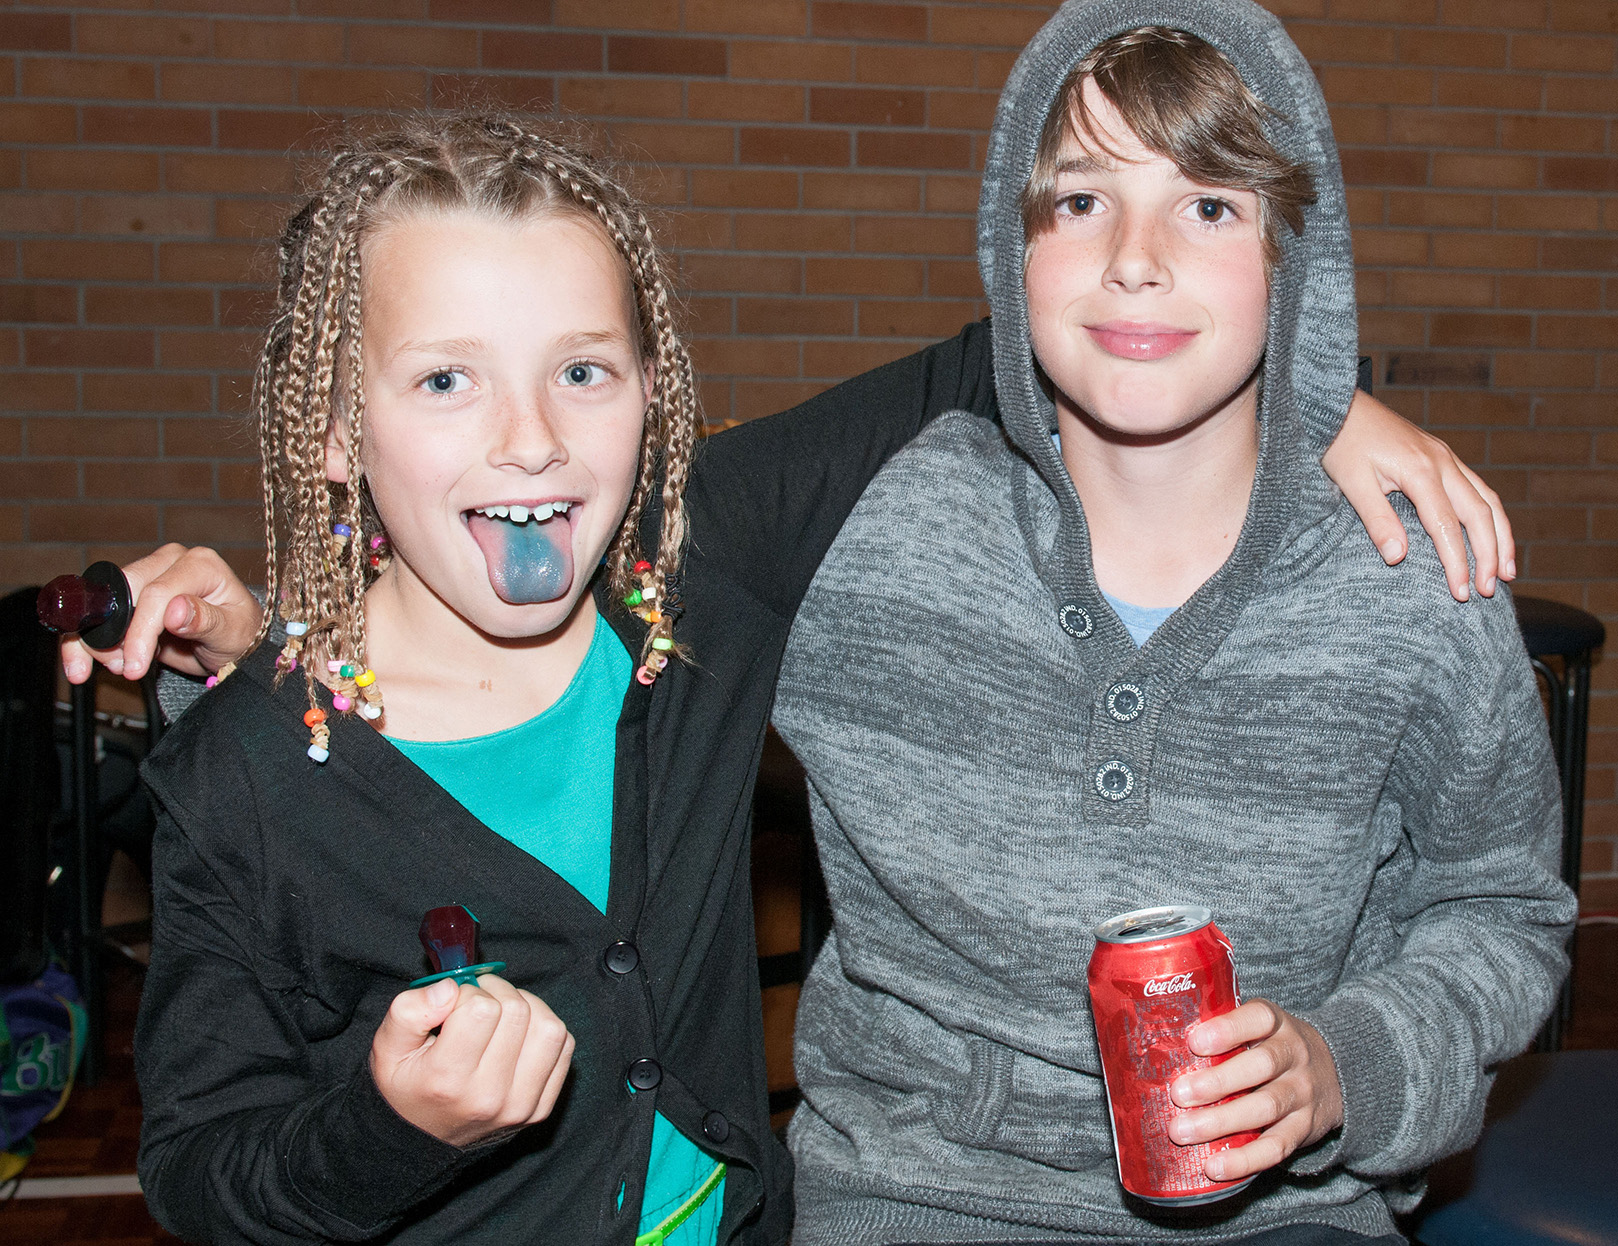 Blue tongue with lollies Kadimah jewish school in Auckland city 108 Greys Ave Auckland. Izaac Bar Mitzvah celebration photographed by Anais Chaine.